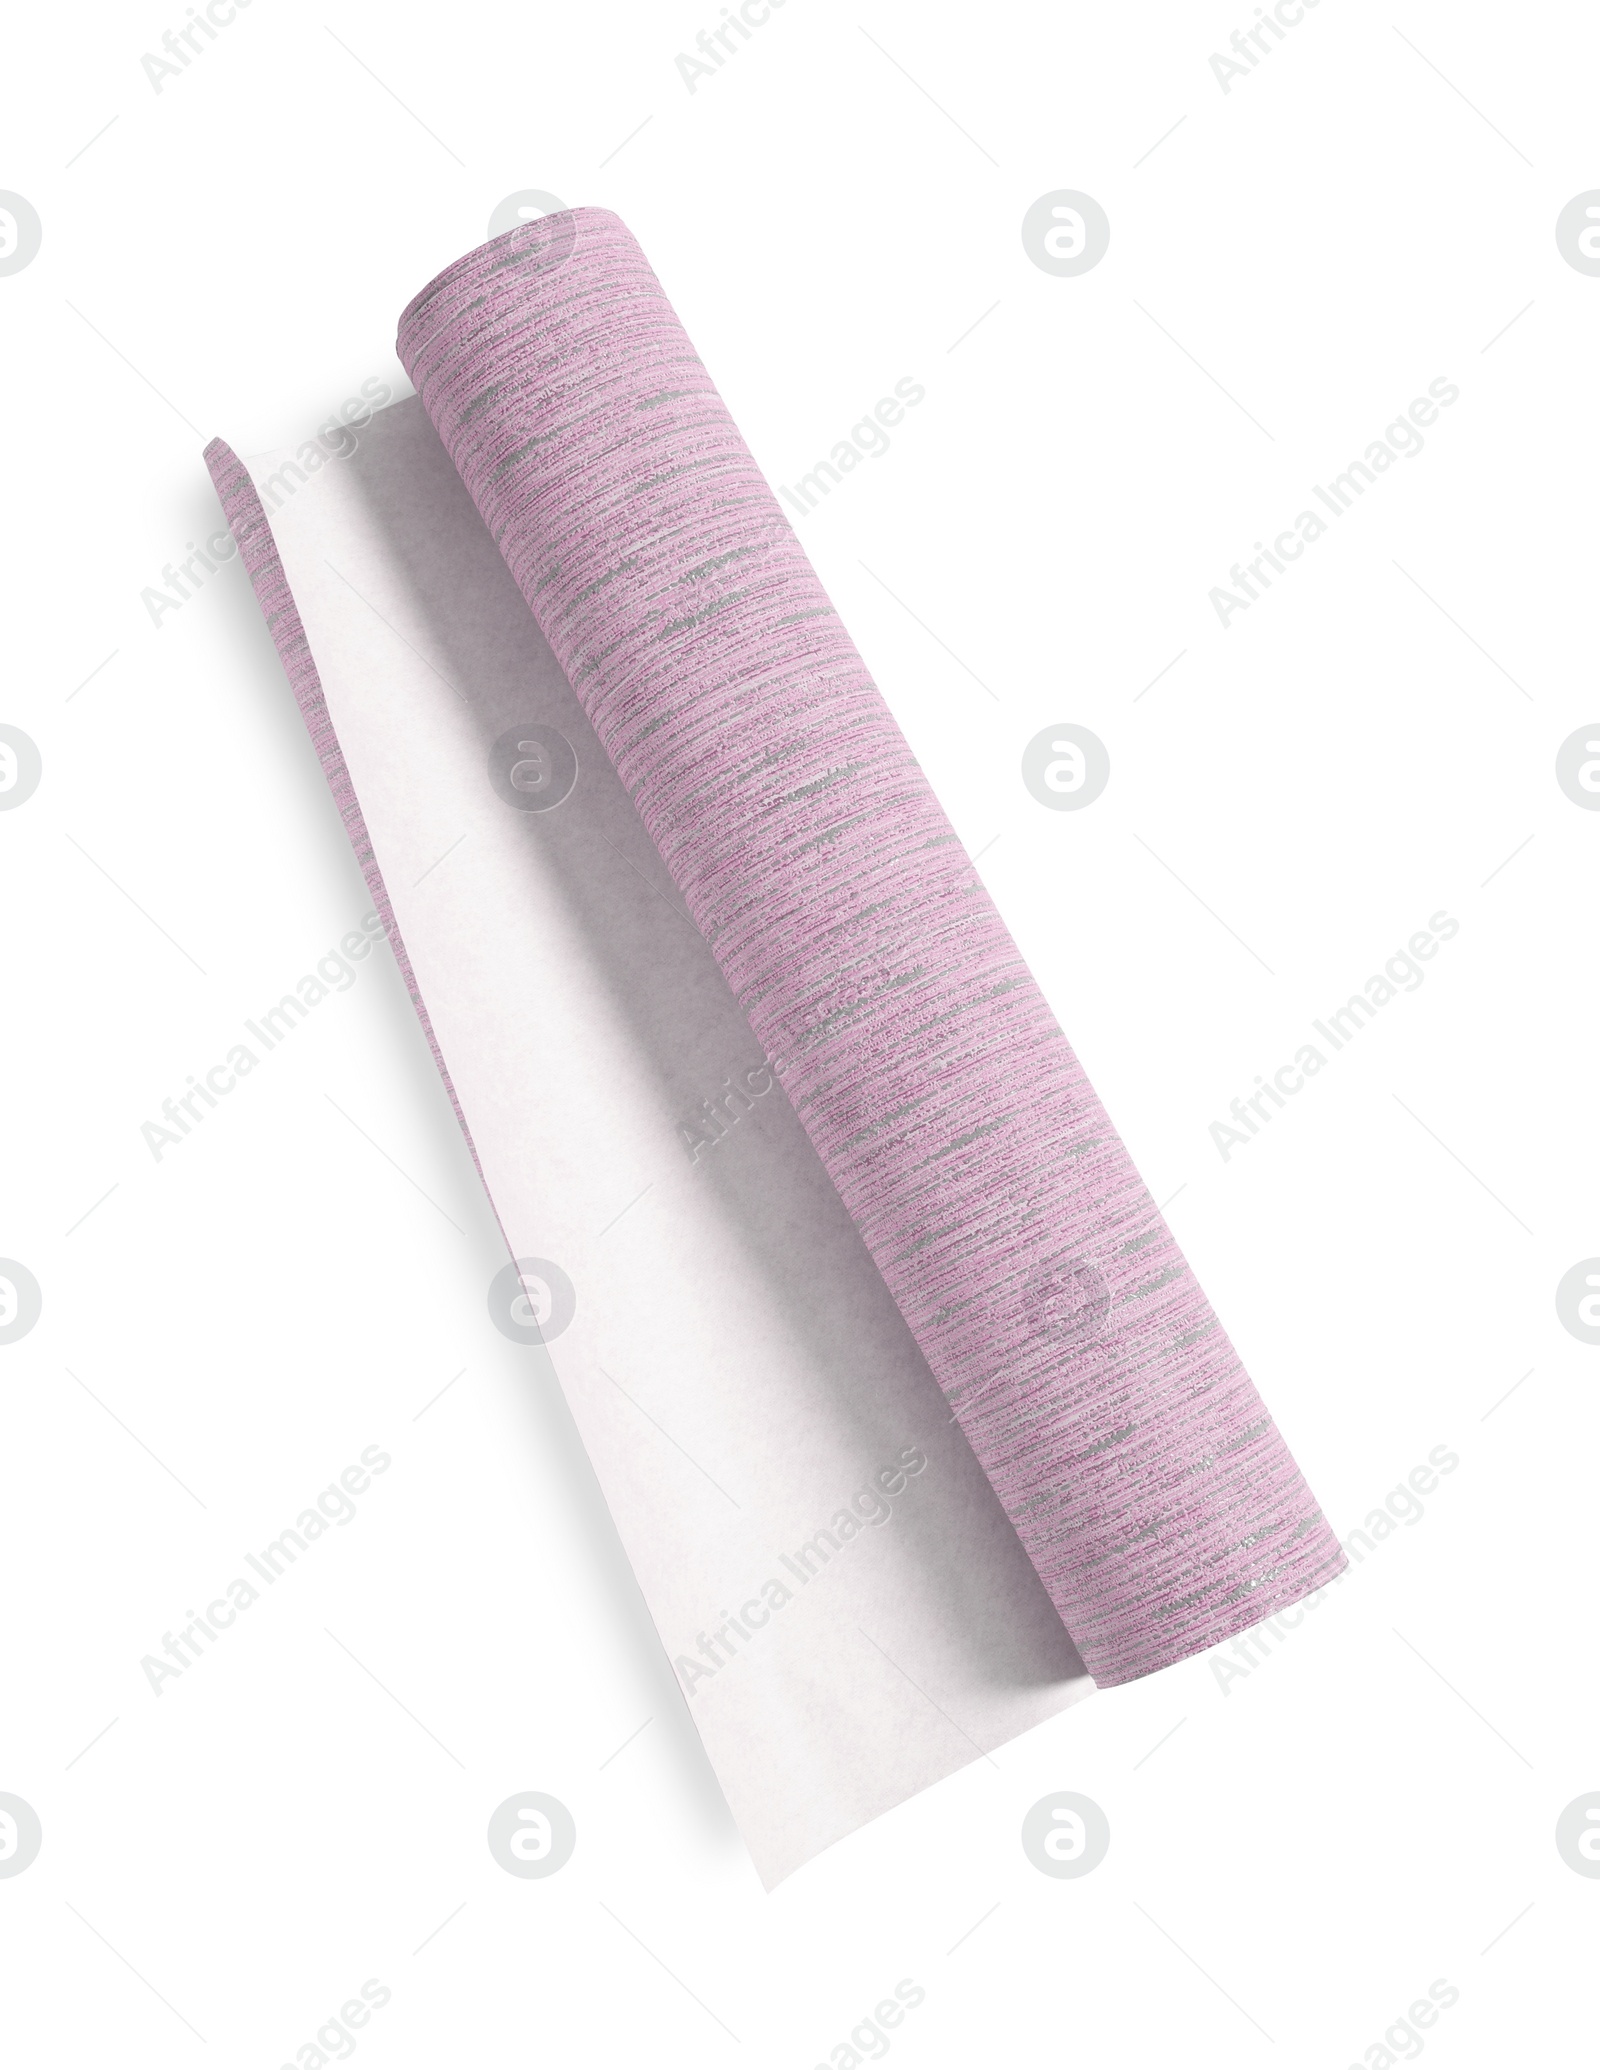 Image of One pink wallpaper roll isolated on white, top view